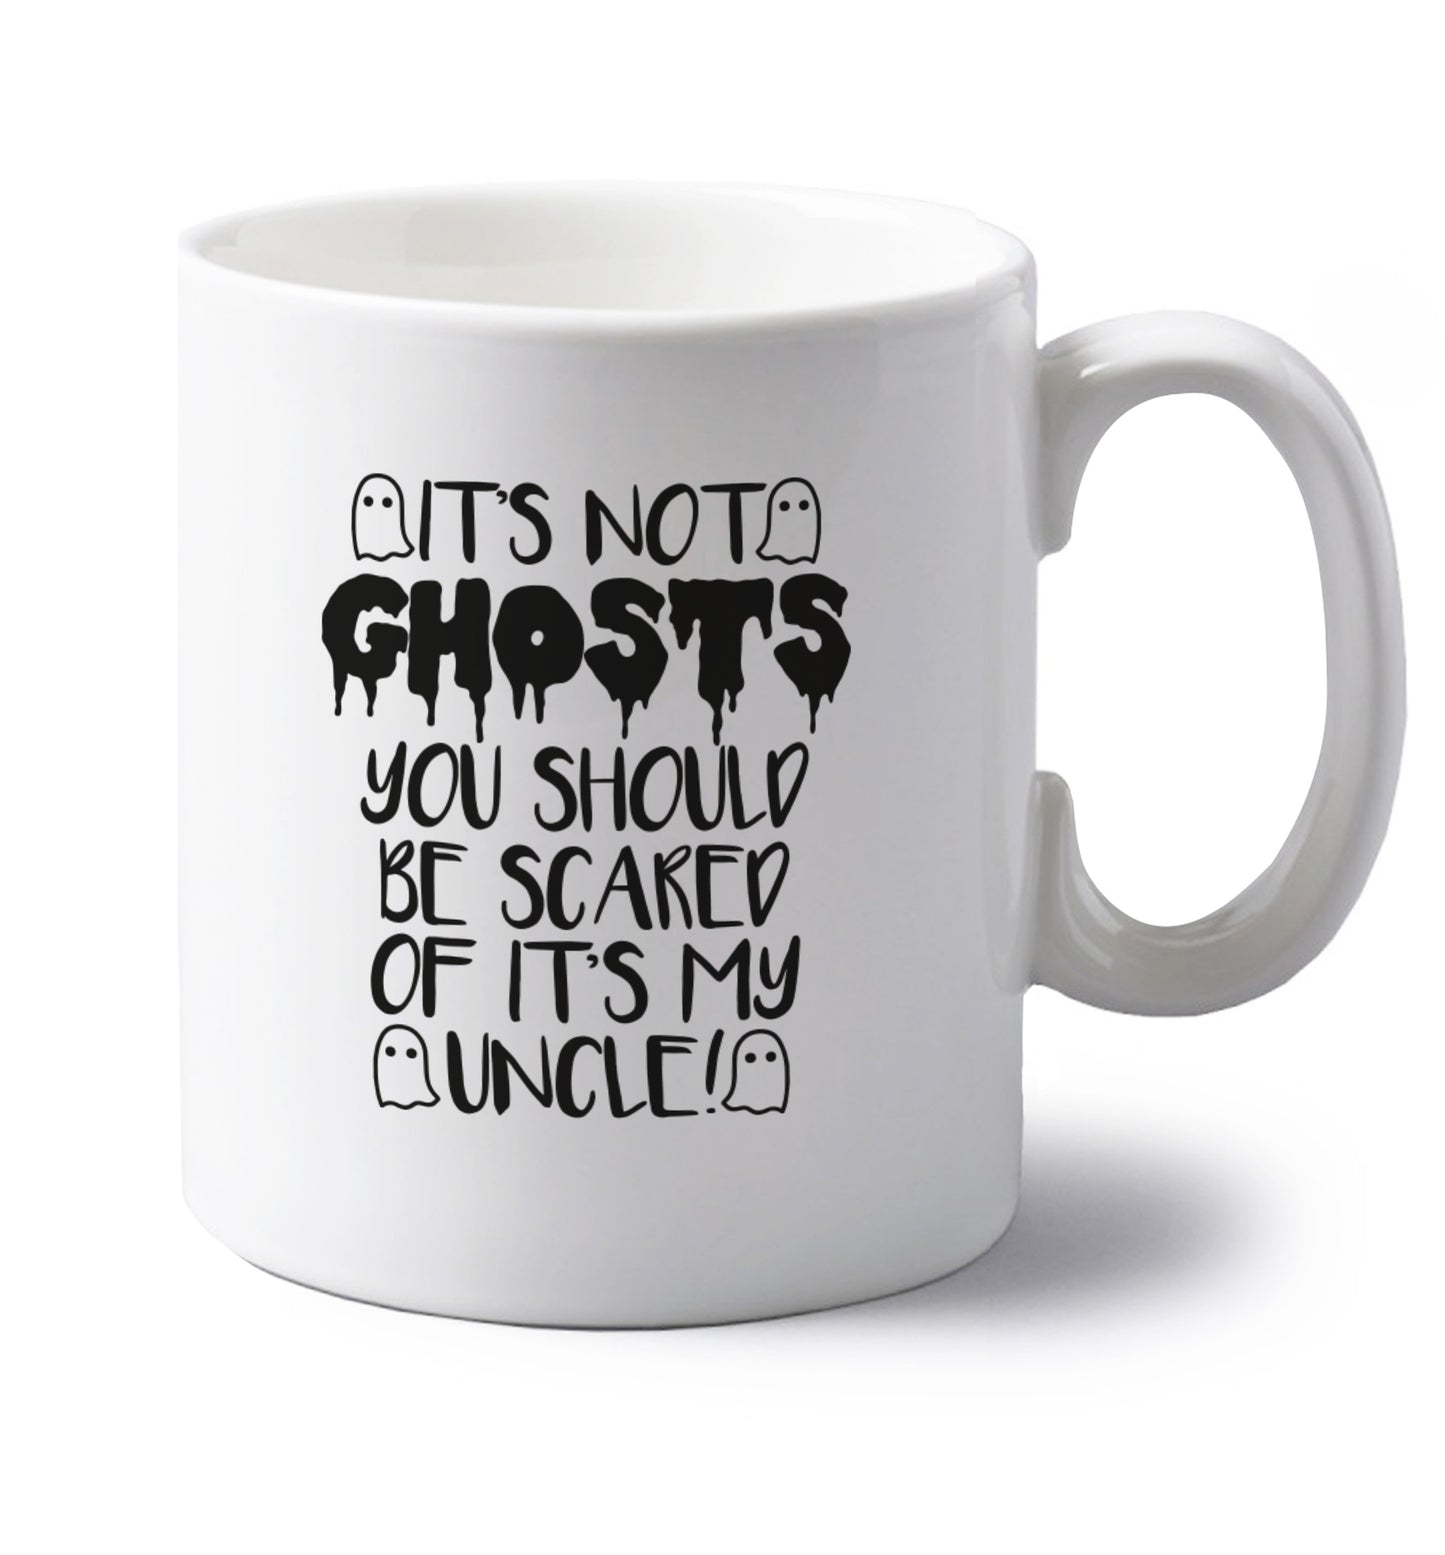 It's not ghosts you should be scared of it's my uncle! left handed white ceramic mug 